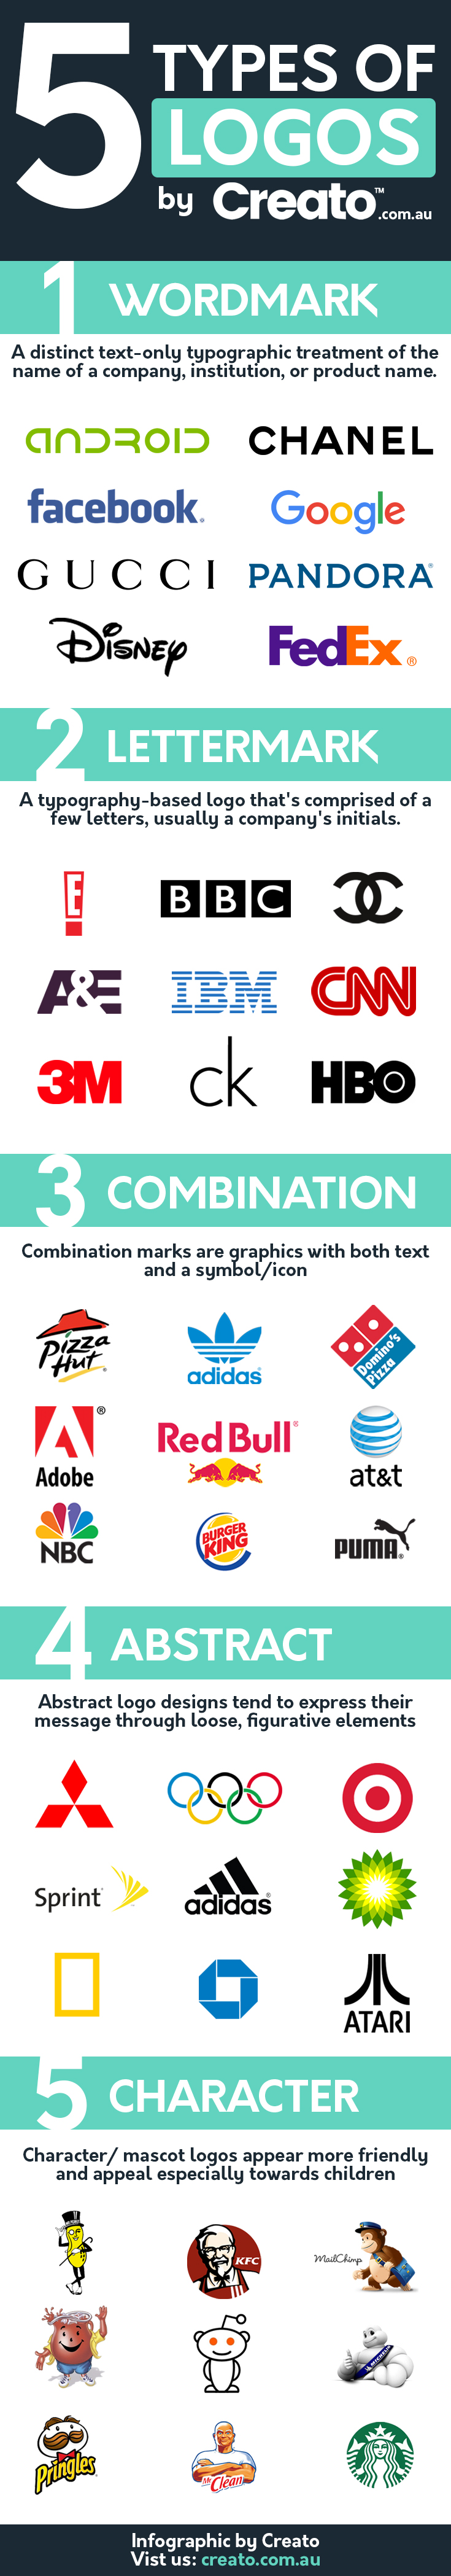 Different types of logos 